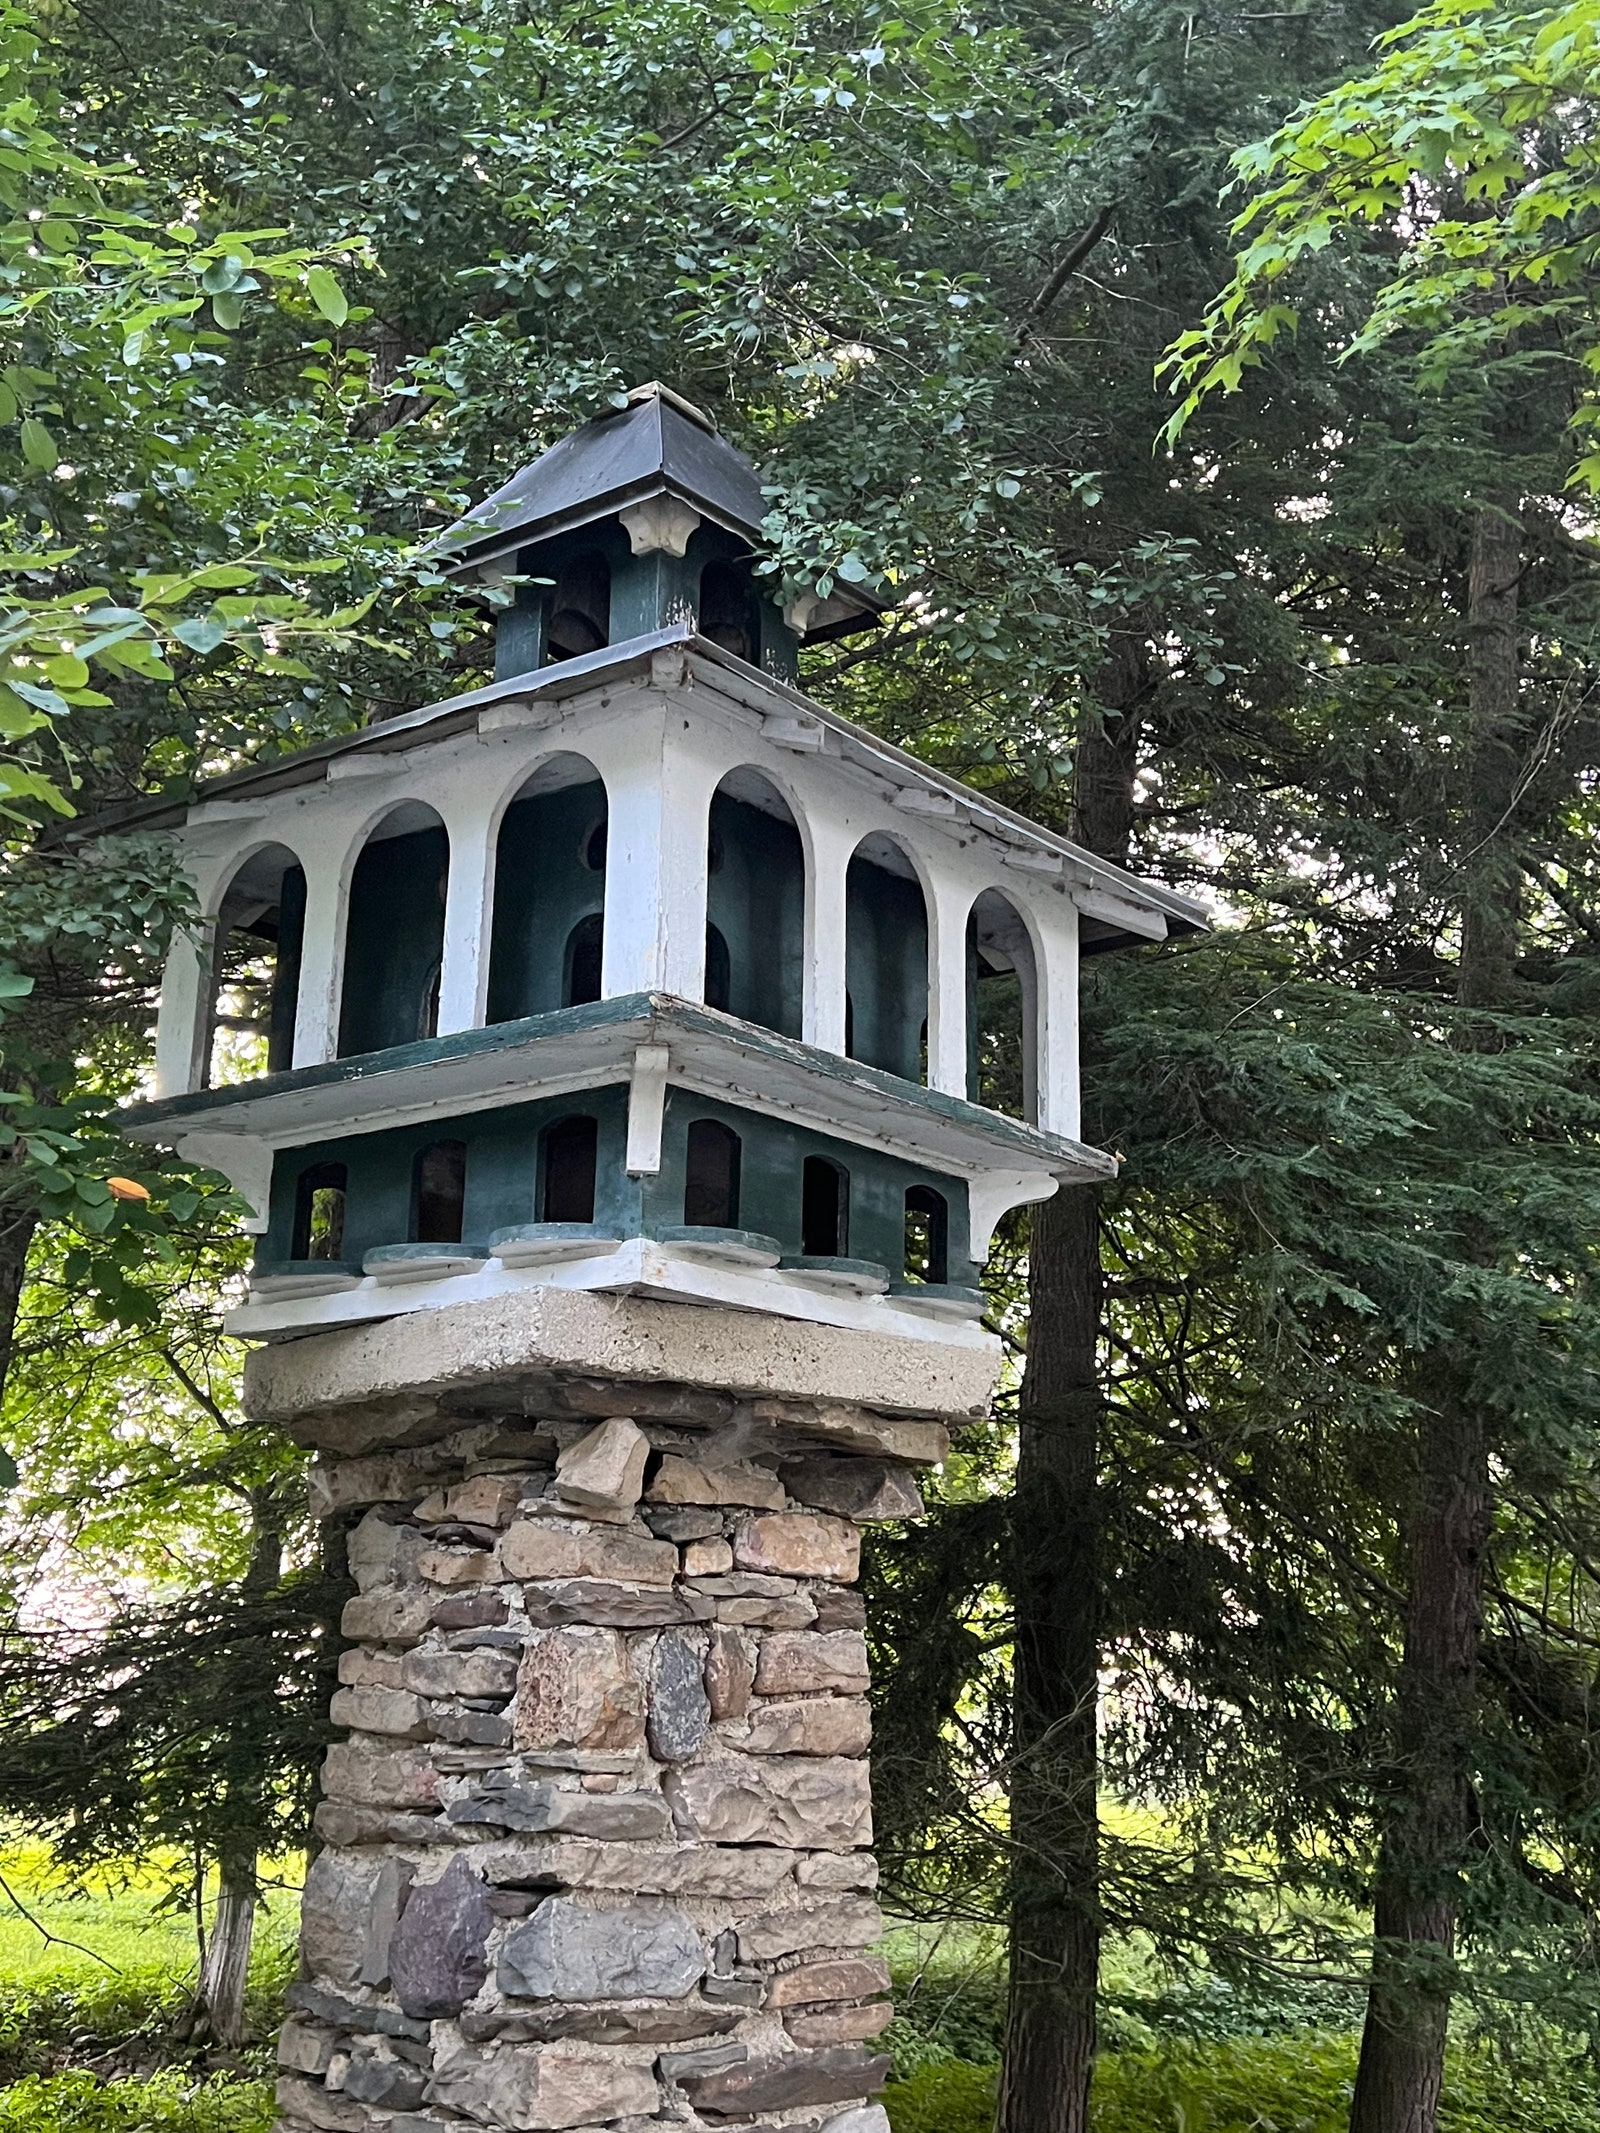 The gardens galleried birdhouse dates from the early 1900s. Photograph Mitchell Owens 2023